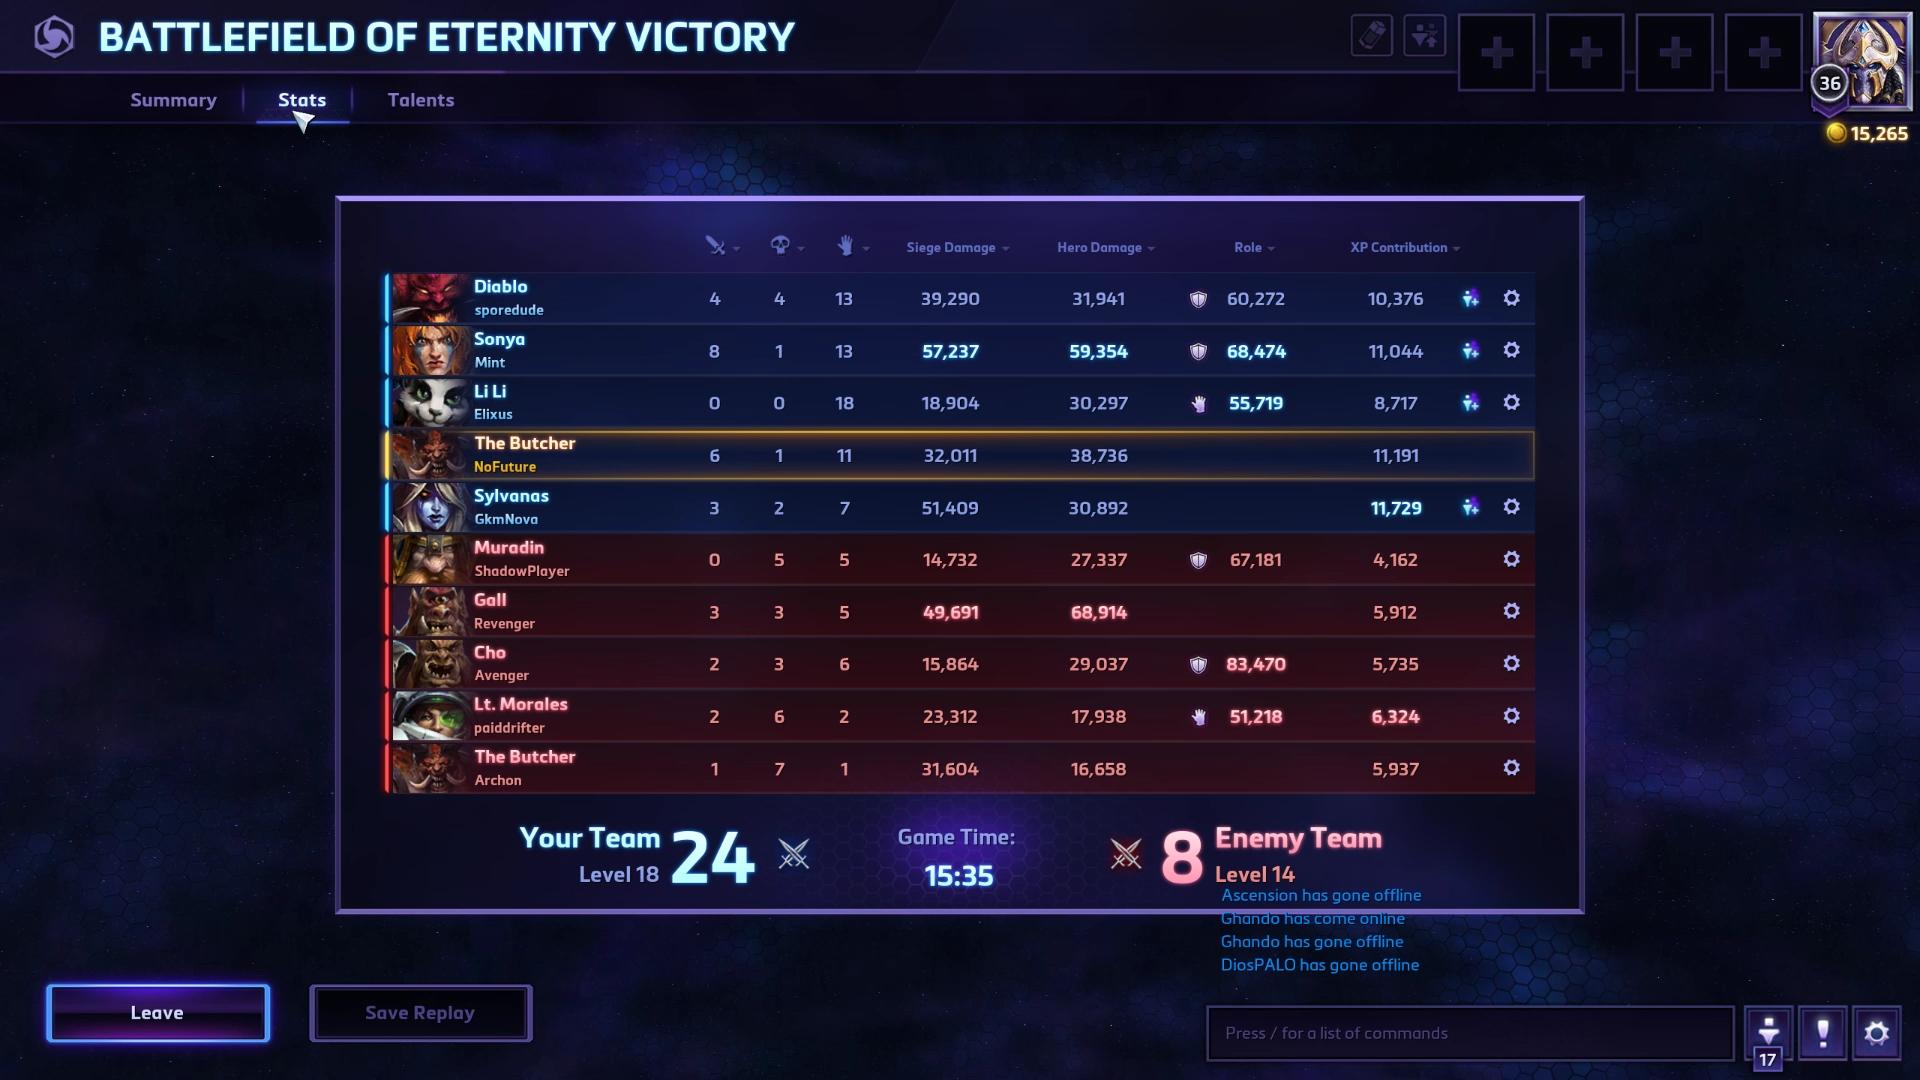 Adding Kill-Death Ratios To Heroes Of The Storm Was A Bad Idea